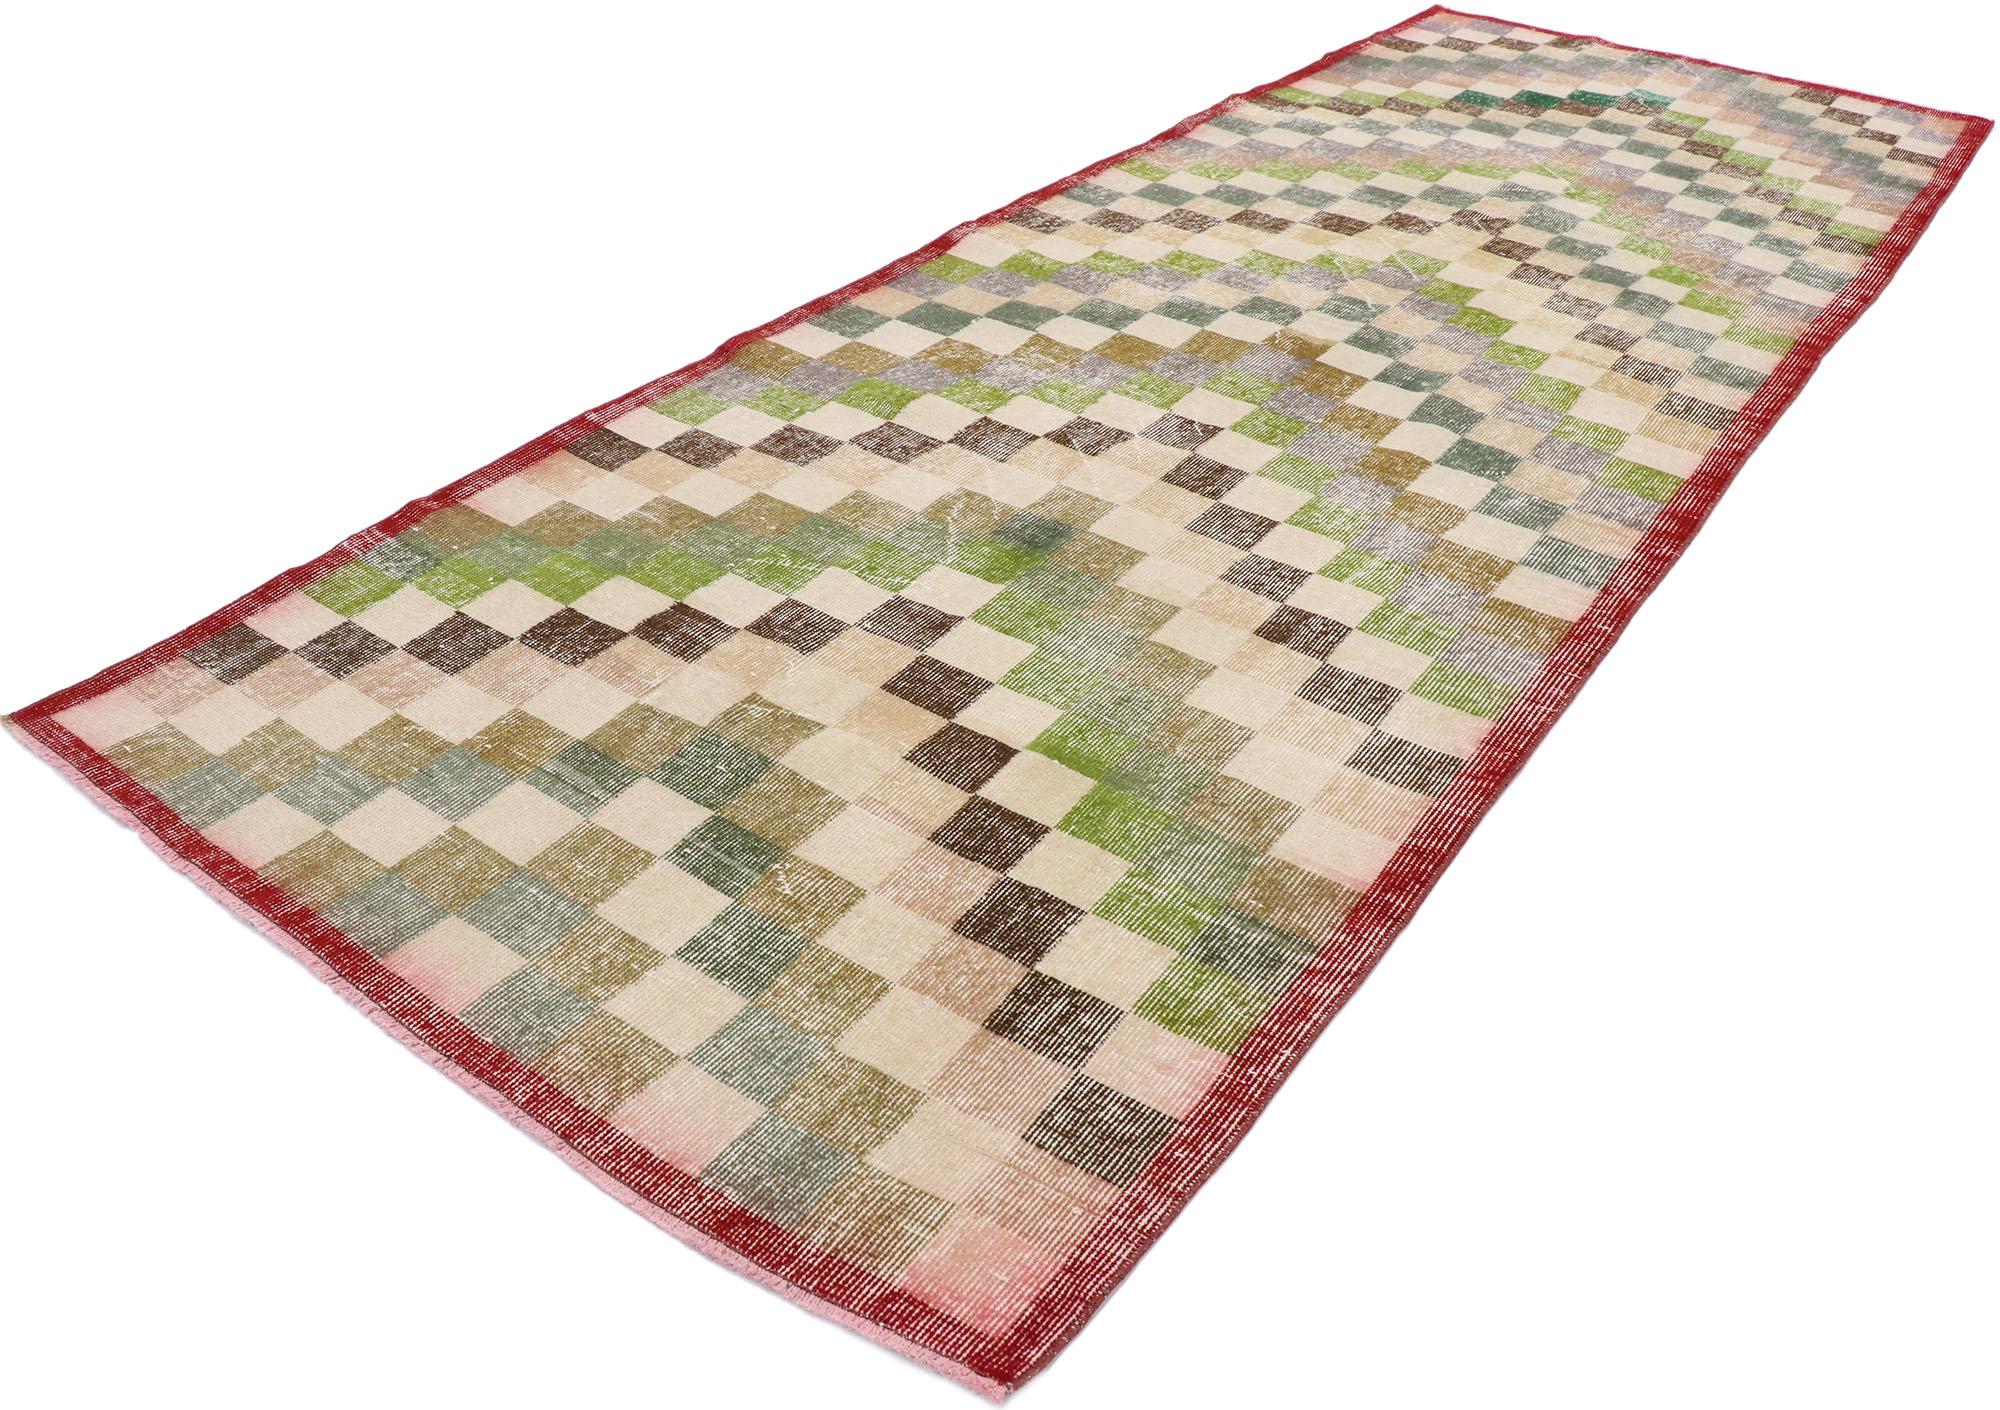 53369 distressed vintage Turkish Sivas rug with rustic Mid-Century Modern cubist style, this hand knotted wool distressed vintage Turkish Sivas rug features an all-over checkered chevron pattern comprised of rows of multi-colored squares. Each row